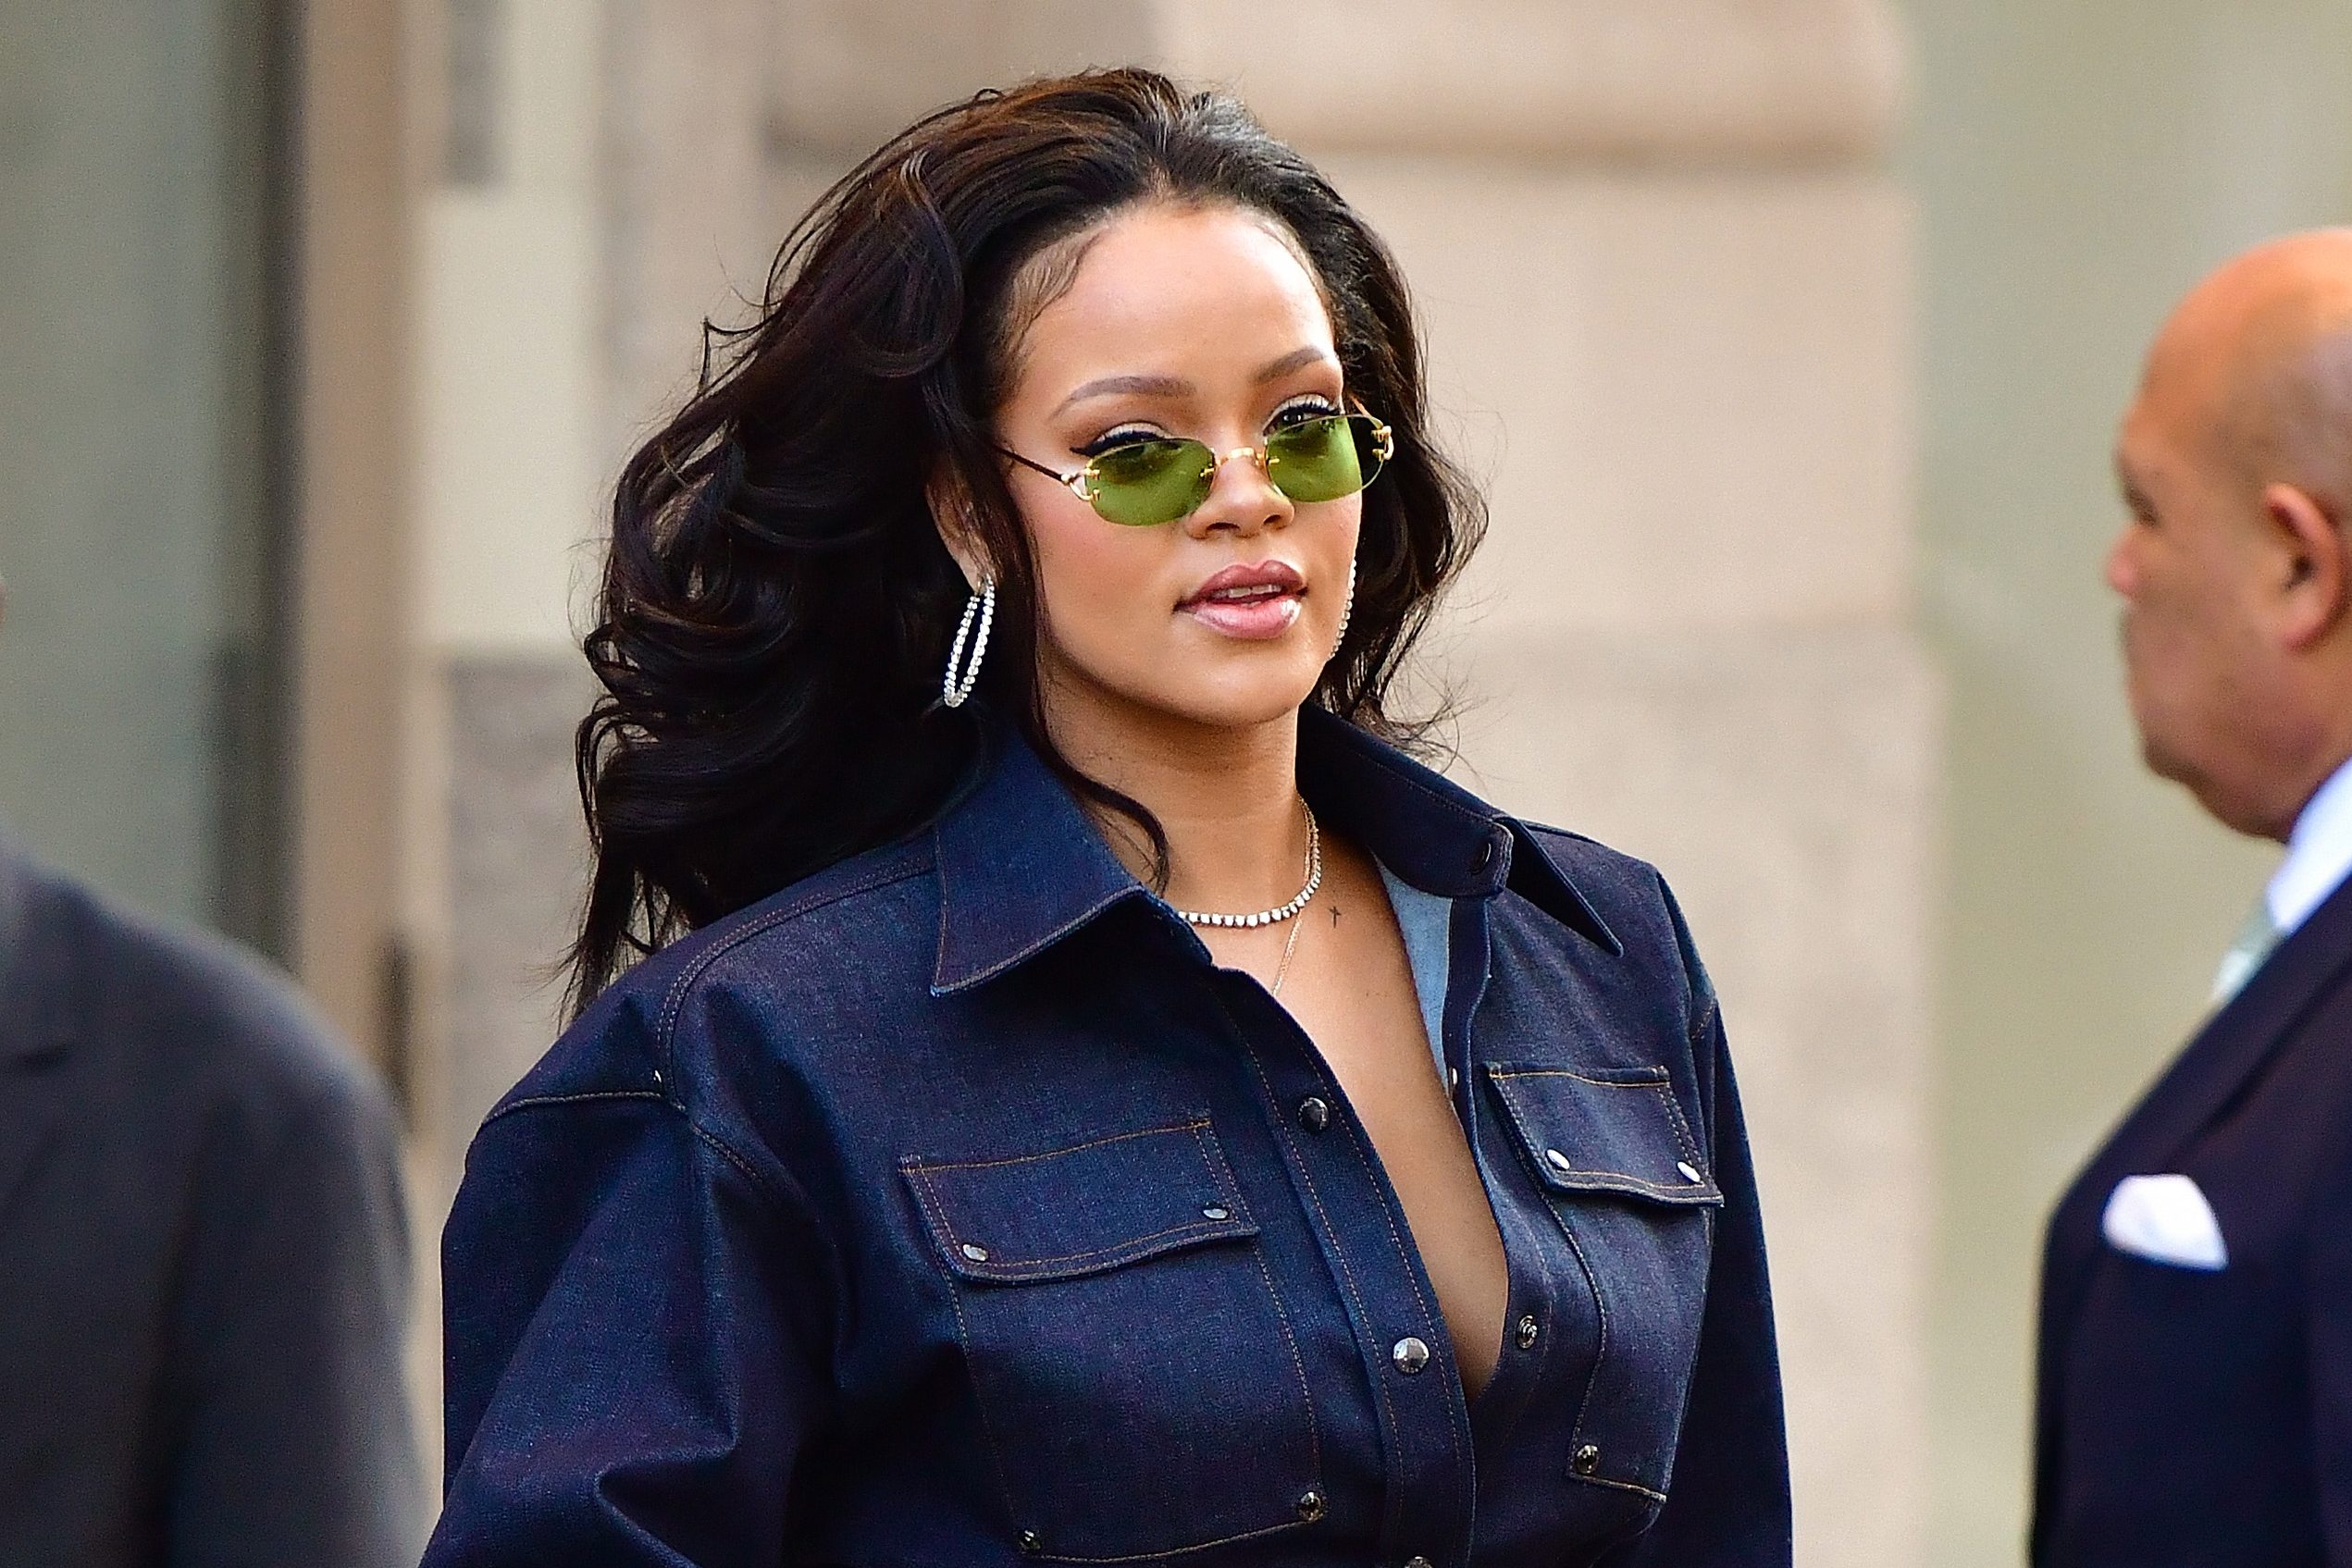 Rihanna Will Be The First Woman to Create Her Own Brand Under LVMH